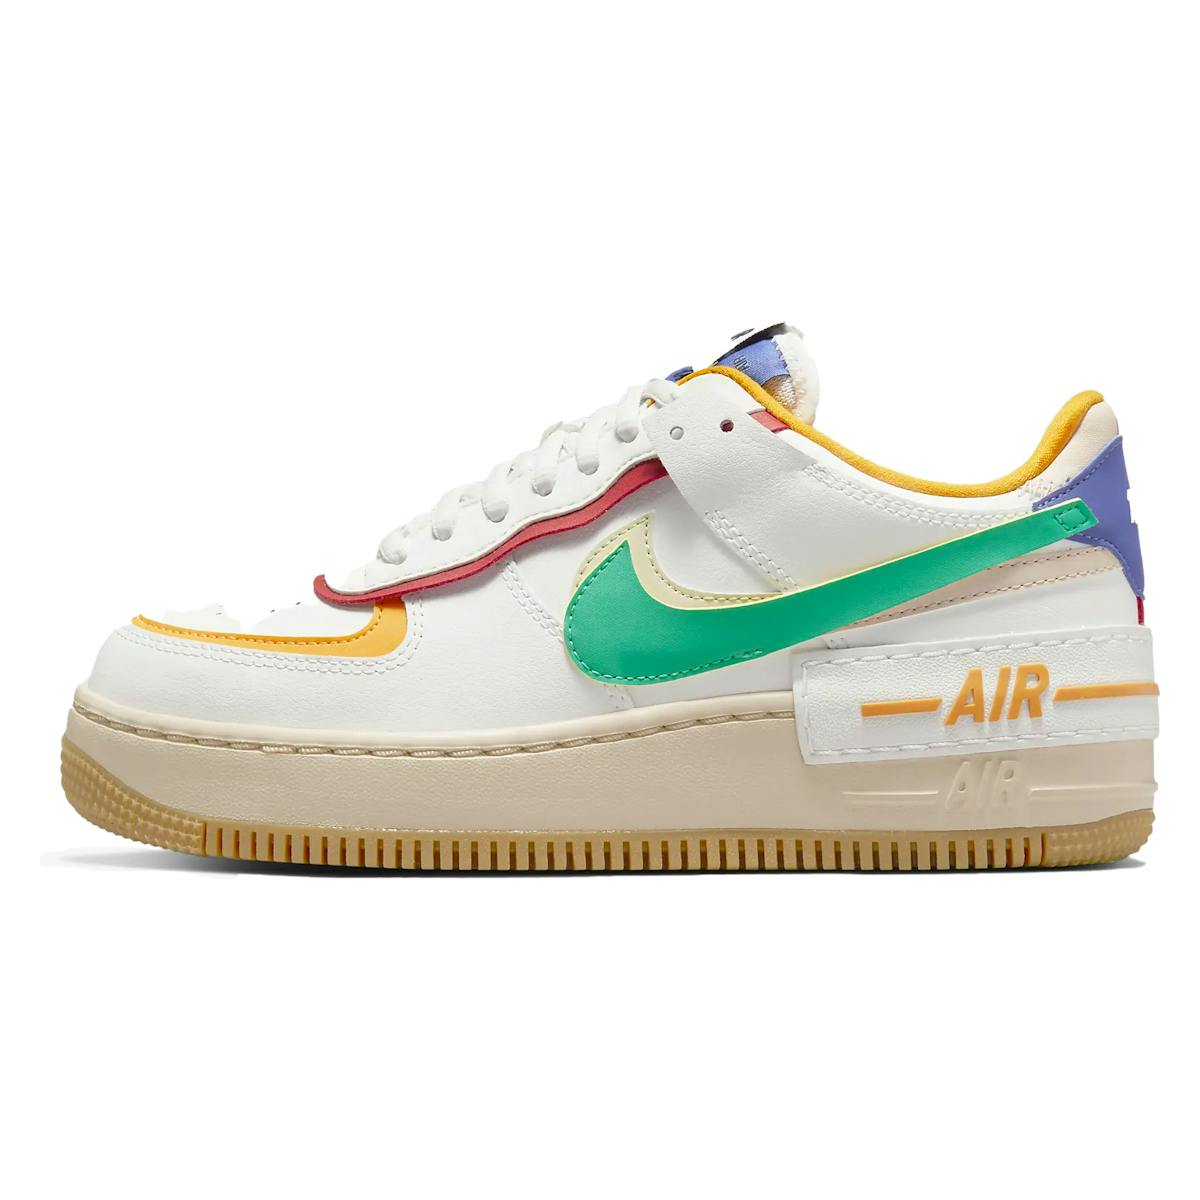 Nike Air Force 1 Shadow "Multicolor"